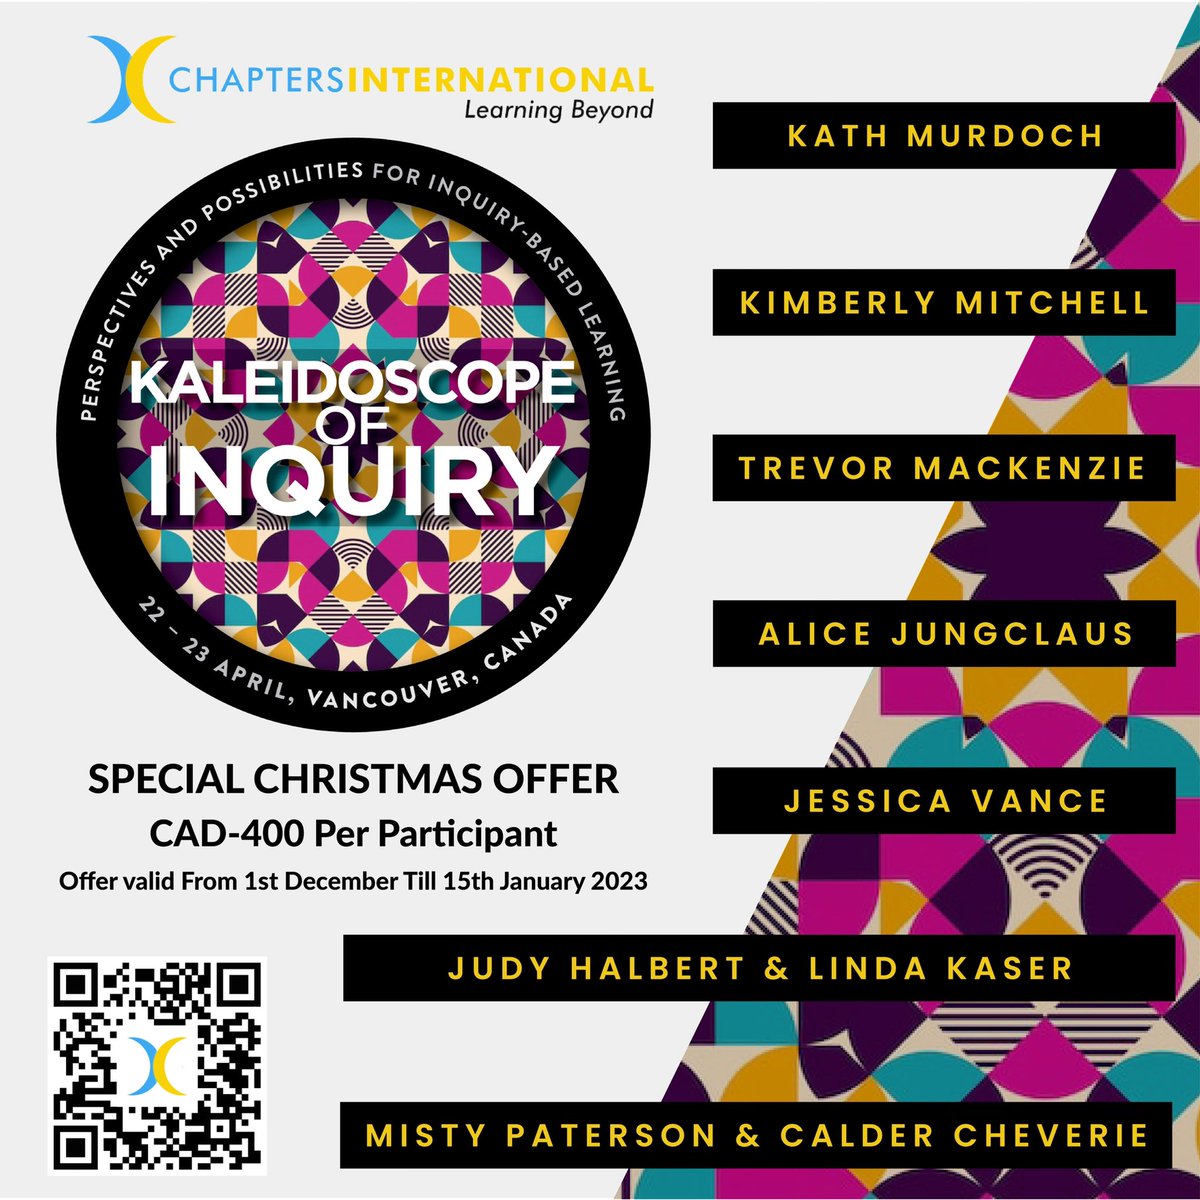 Join @kjinquiry @trev_mackenzie @inquiryfive @kaser_linda Judy Halbert @jess_vanceEDU @AliceJungclaus @PatersonMisty and Calder Cheverie this coming April for the #kalidescopeofInquiry Conference in #Vancouver and avail the special Holiday Offer.